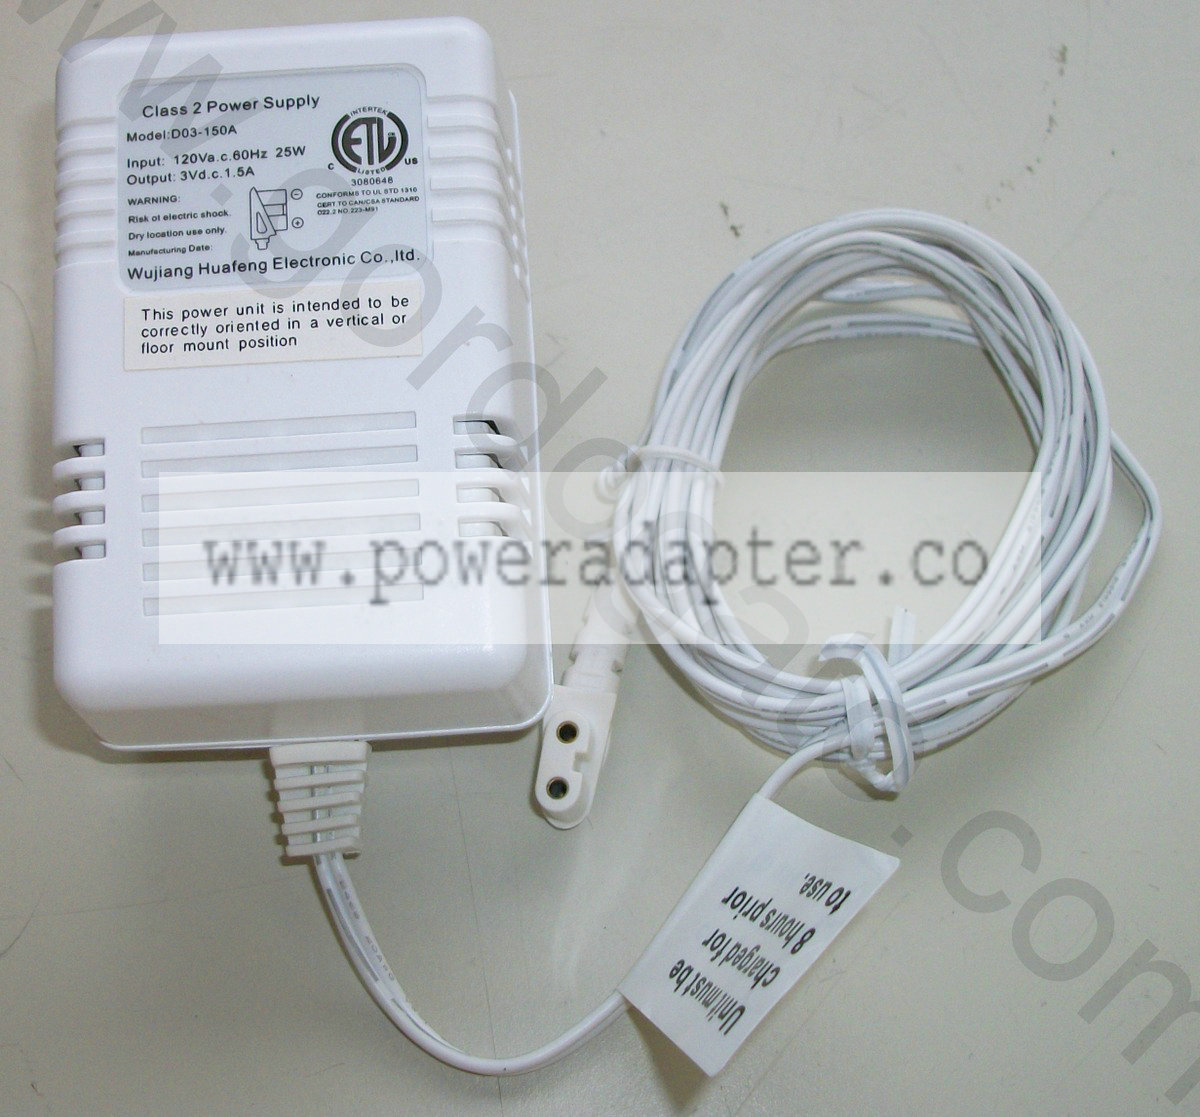 Wujiang Huafeng D03-150A 3VDC, 1.5A AC Adapter [D03-150A] This item is now located here. Input: 120VAC 60Hz 25W Output